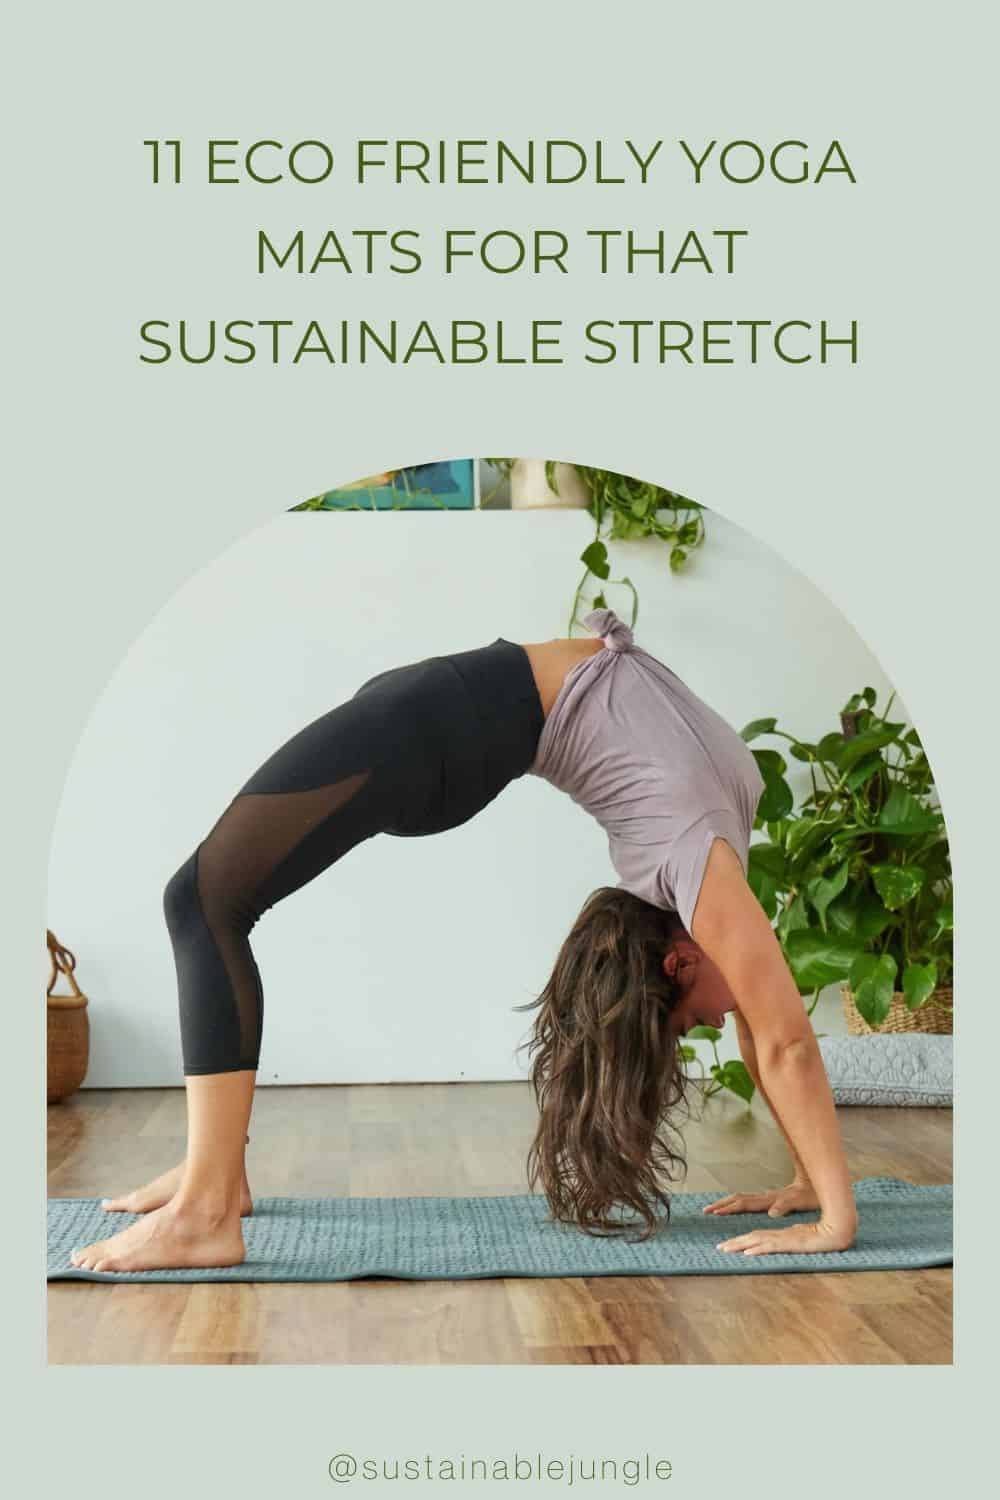 11 Eco Friendly Yoga Mats For That Sustainable Stretch Image by Brentwood Home #ecofriendlyyogamats #sustainableyogamats #sustainablejungle